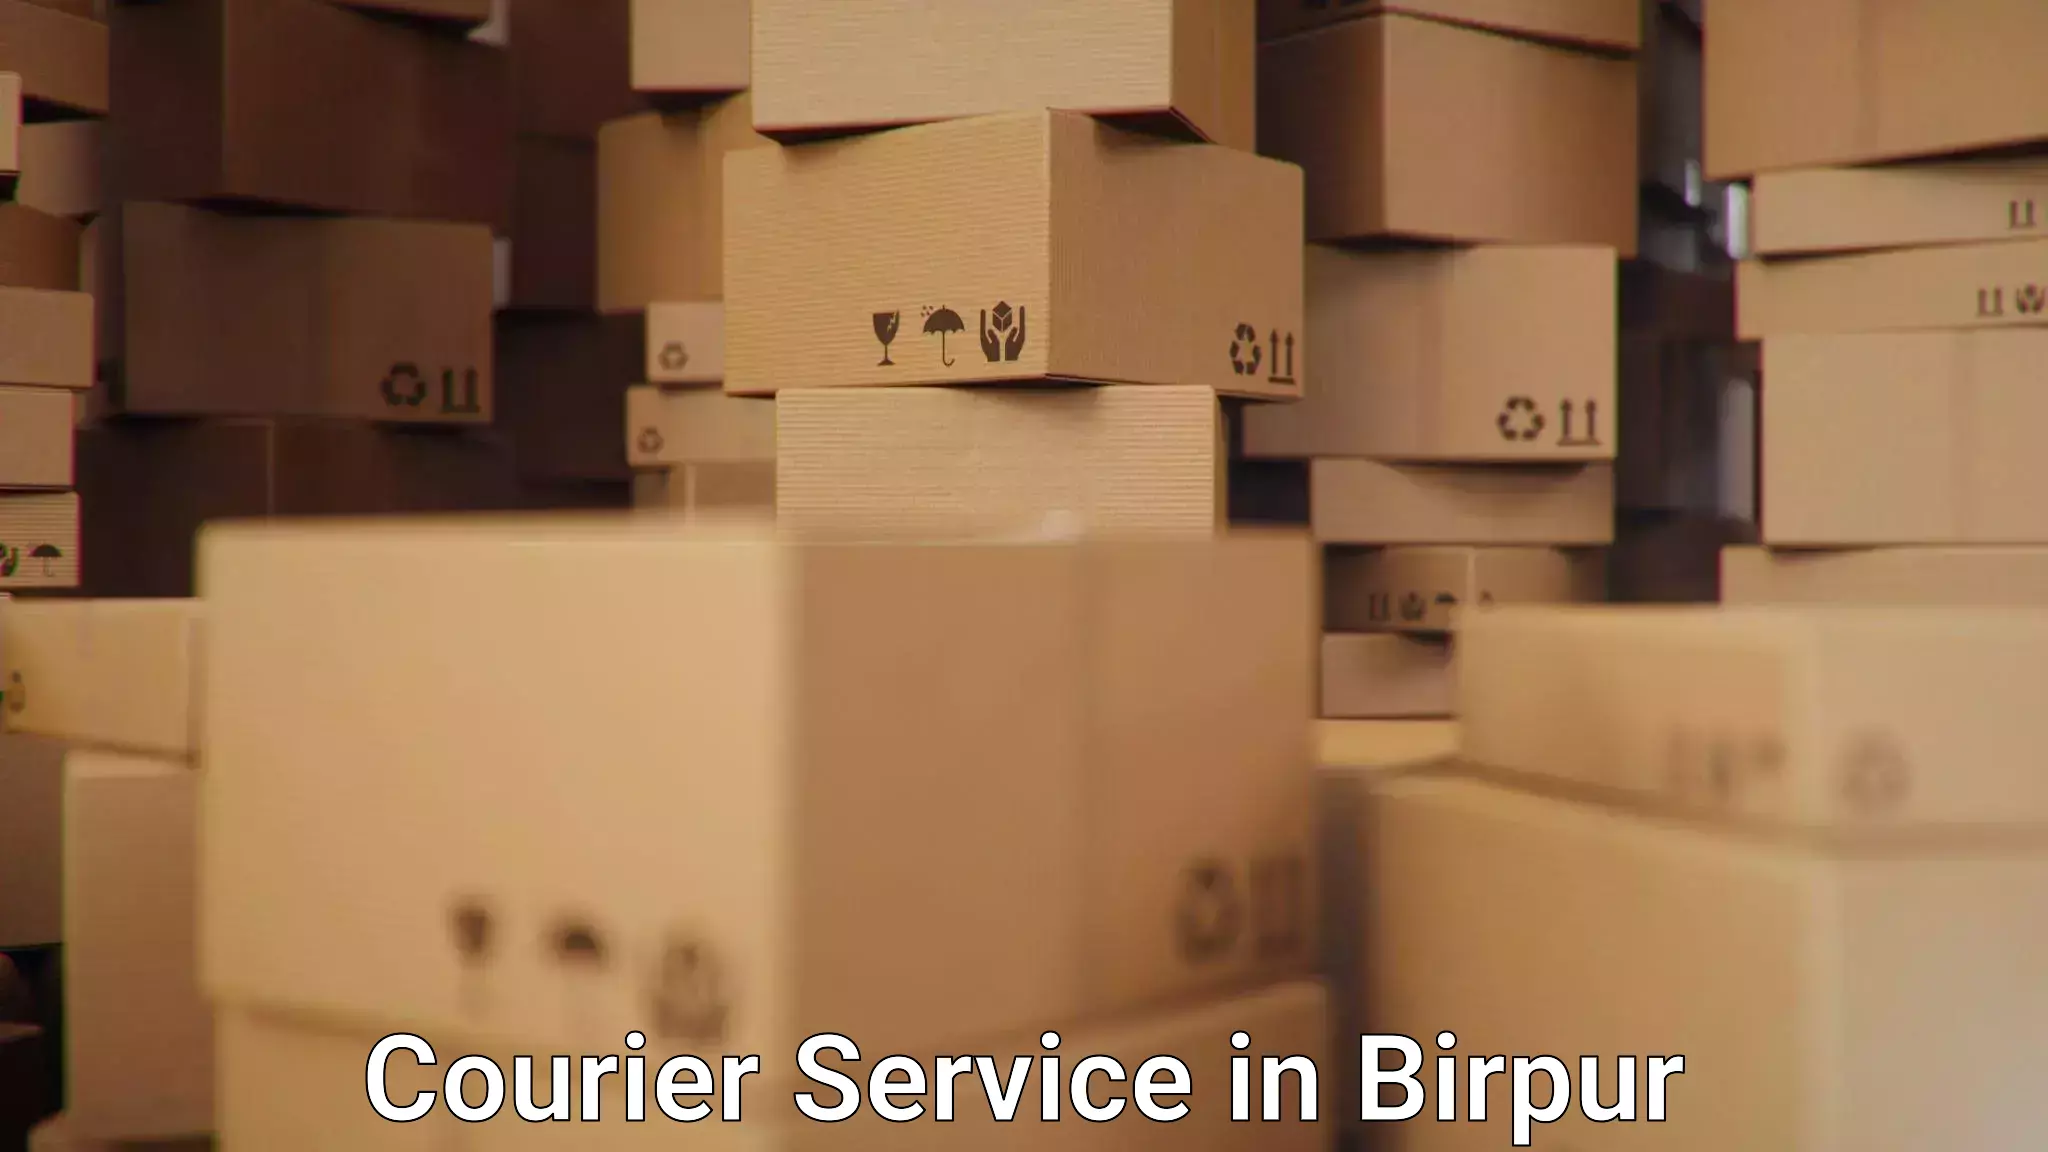 On-demand shipping options in Birpur